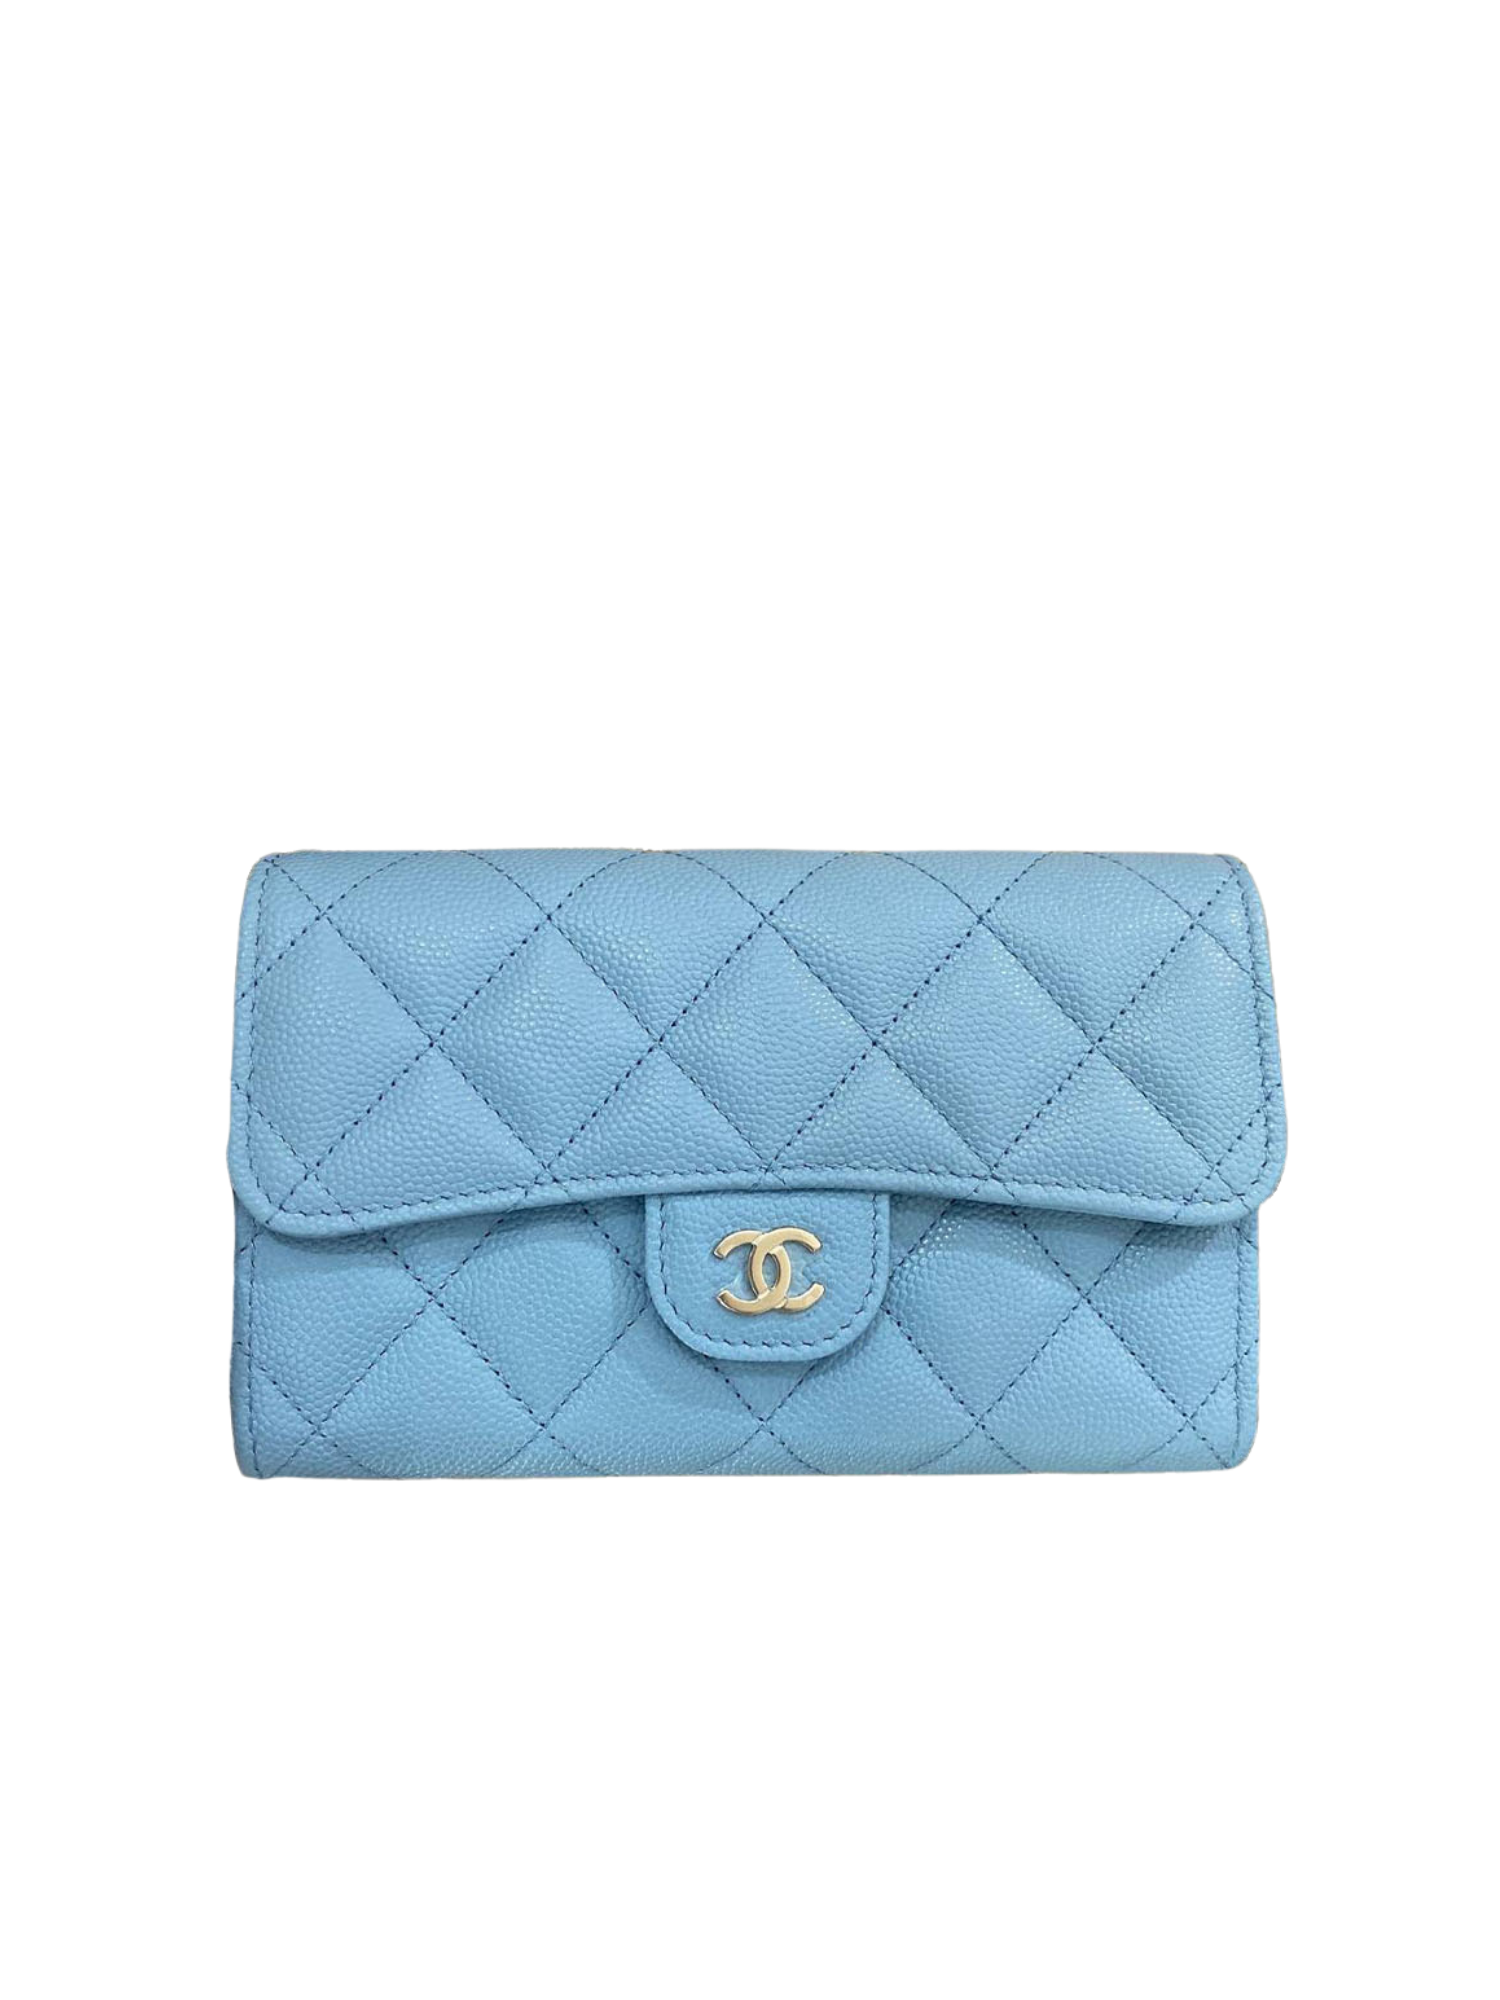 Chanel Medium 6 Trifold 22s Wallet GHW in Blue Holo32